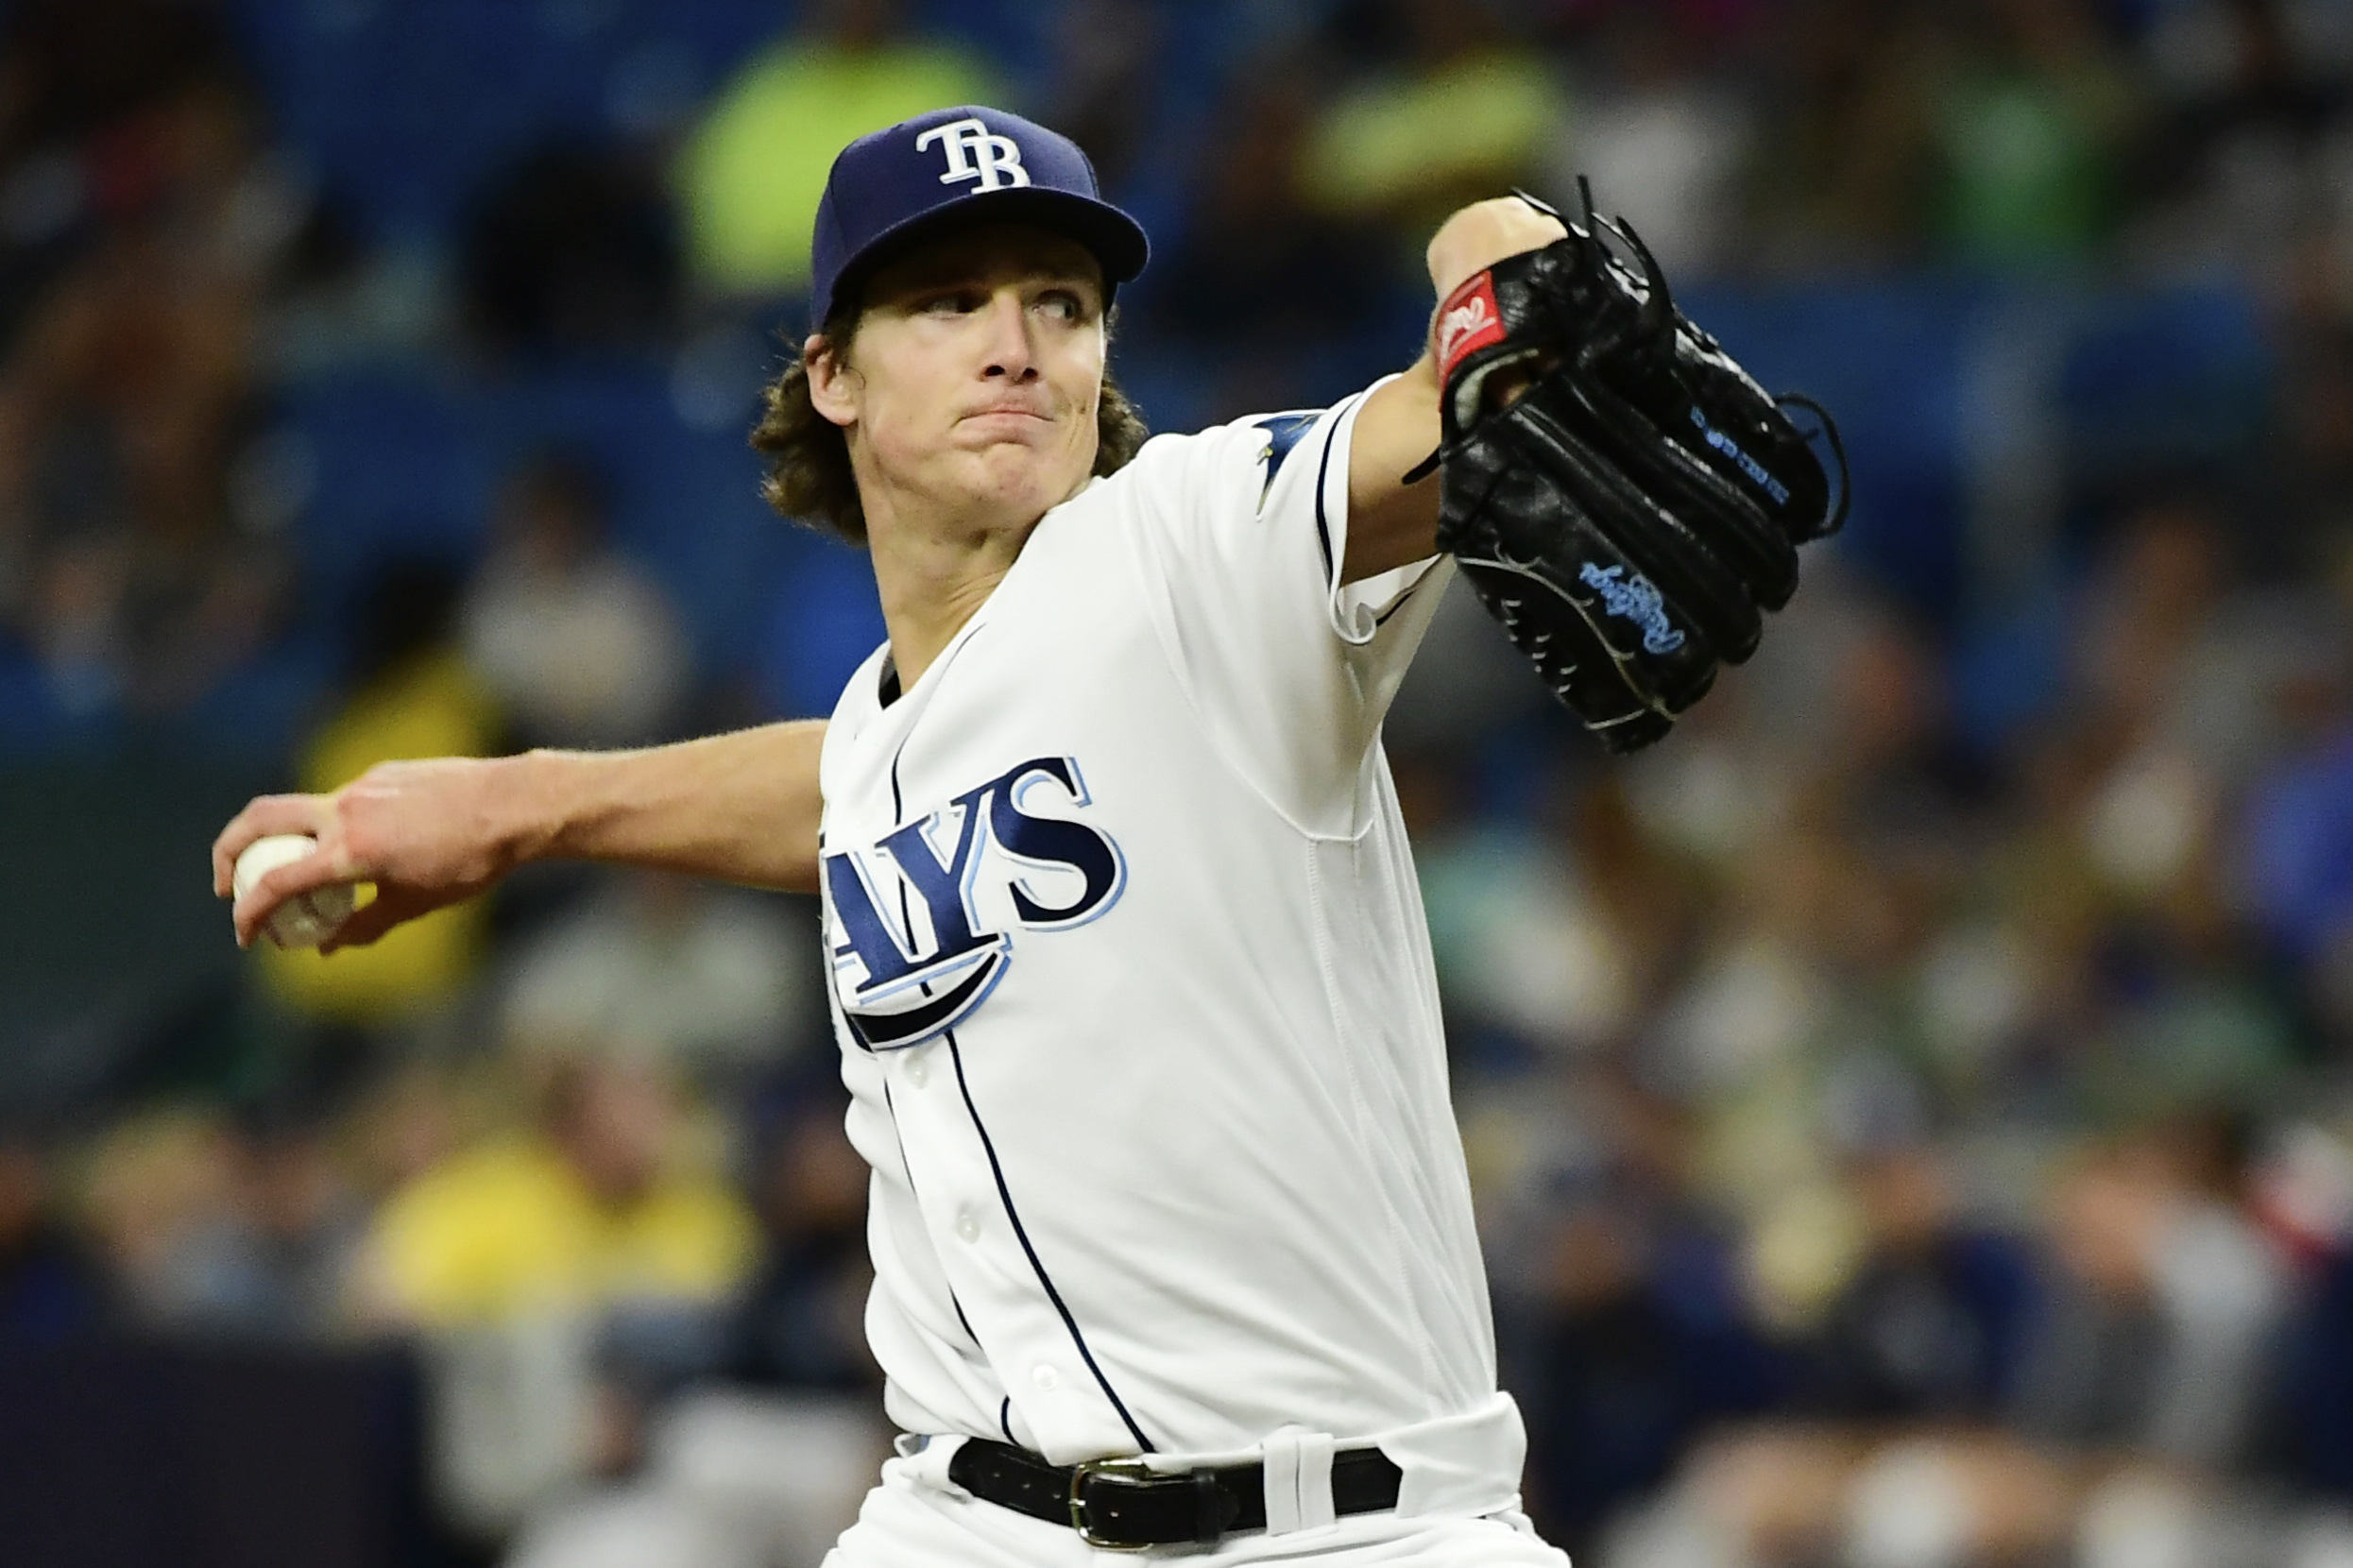 Tyler Glasnow gets extension with Rays as long rehab continues